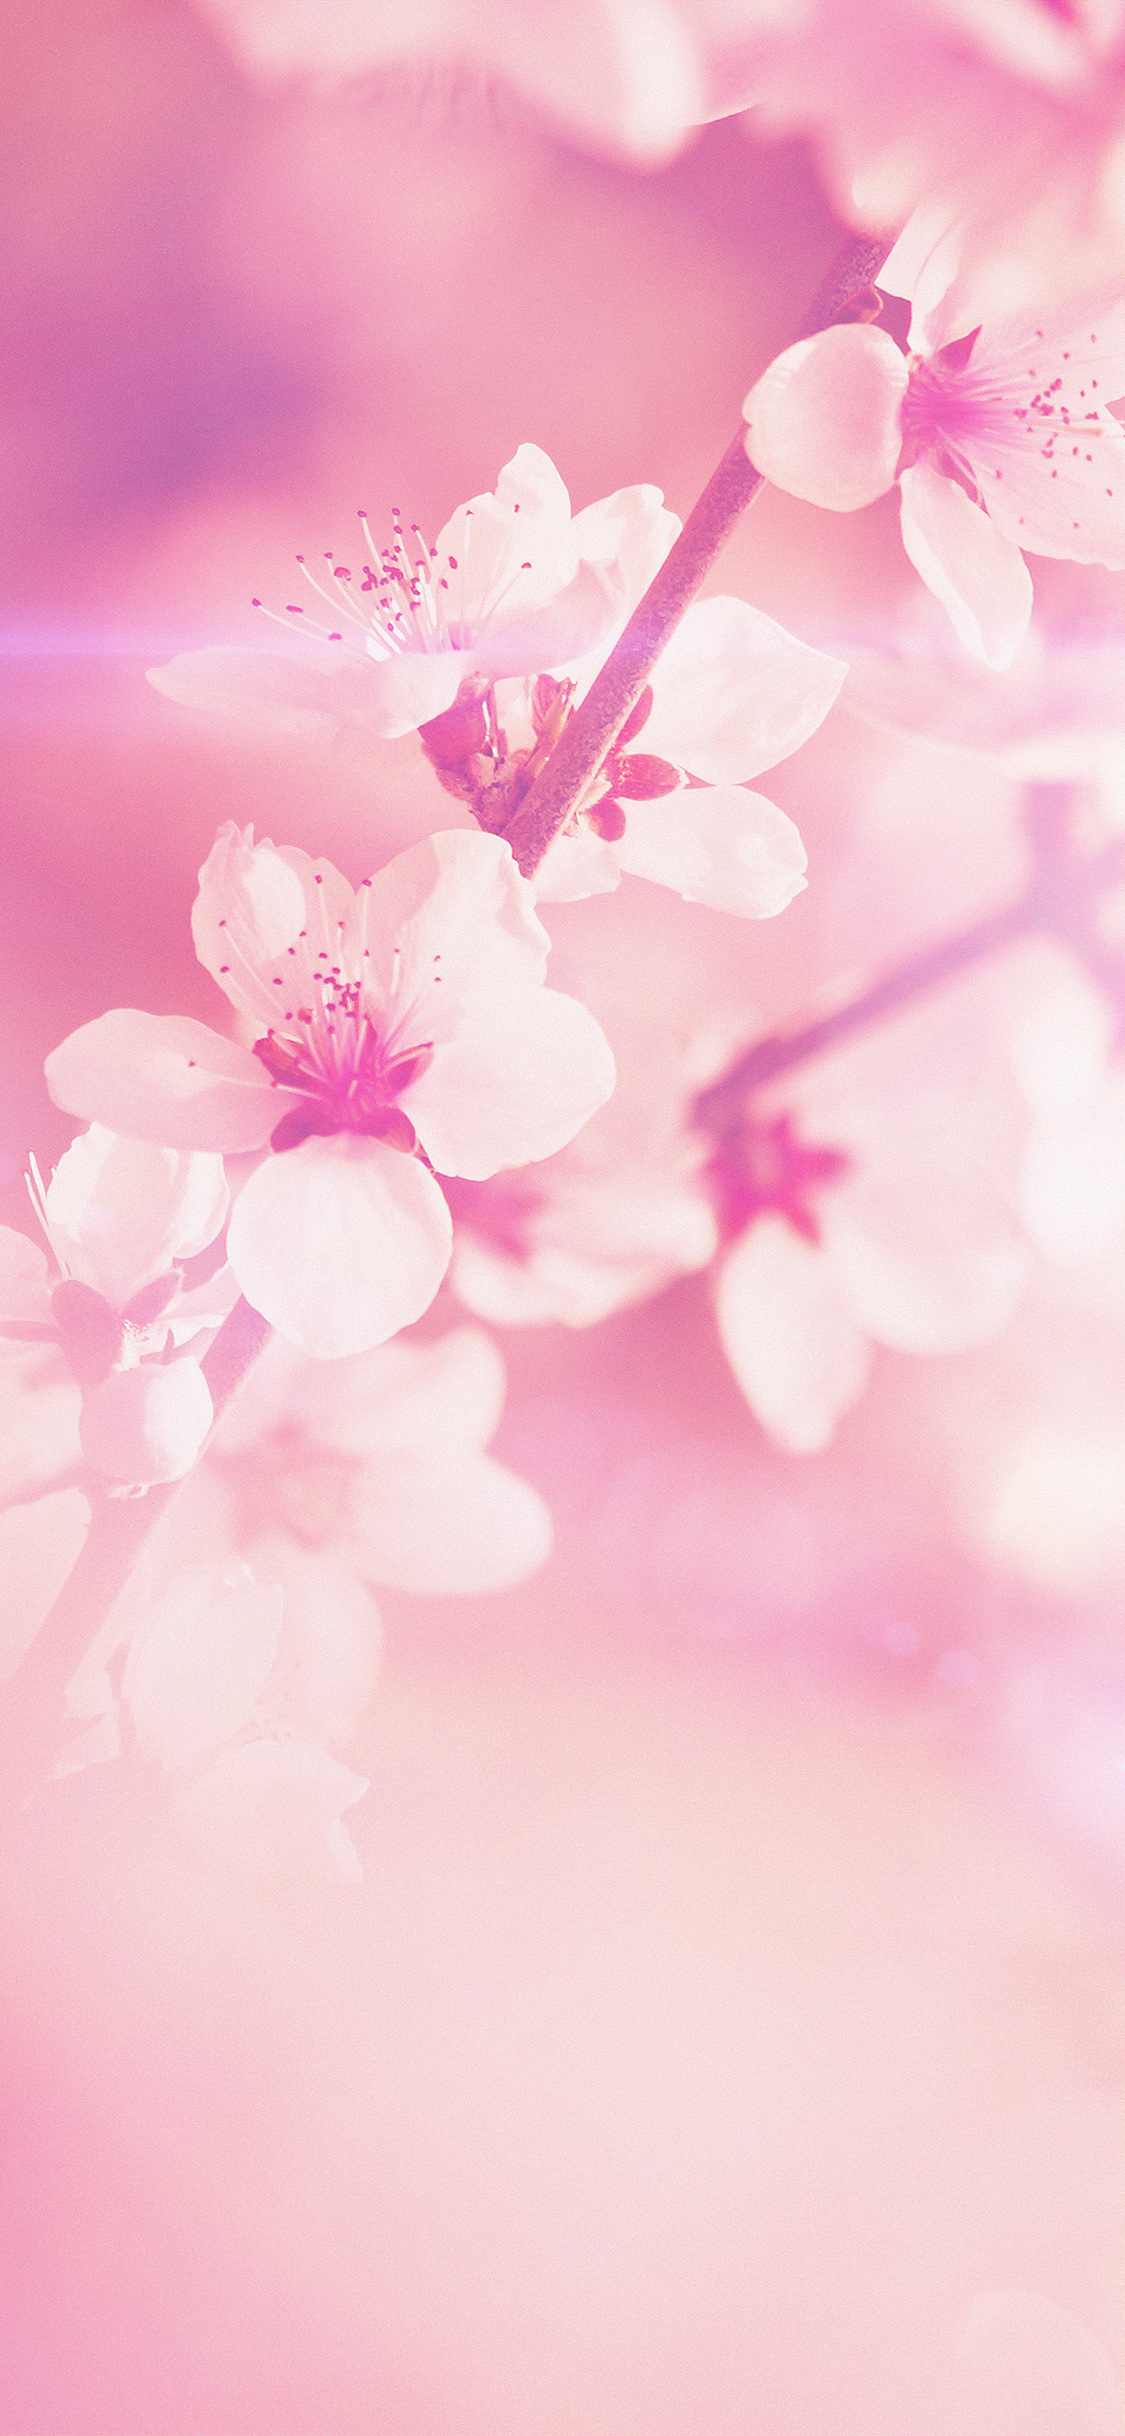 spring flower pink cherry blossom flare nature